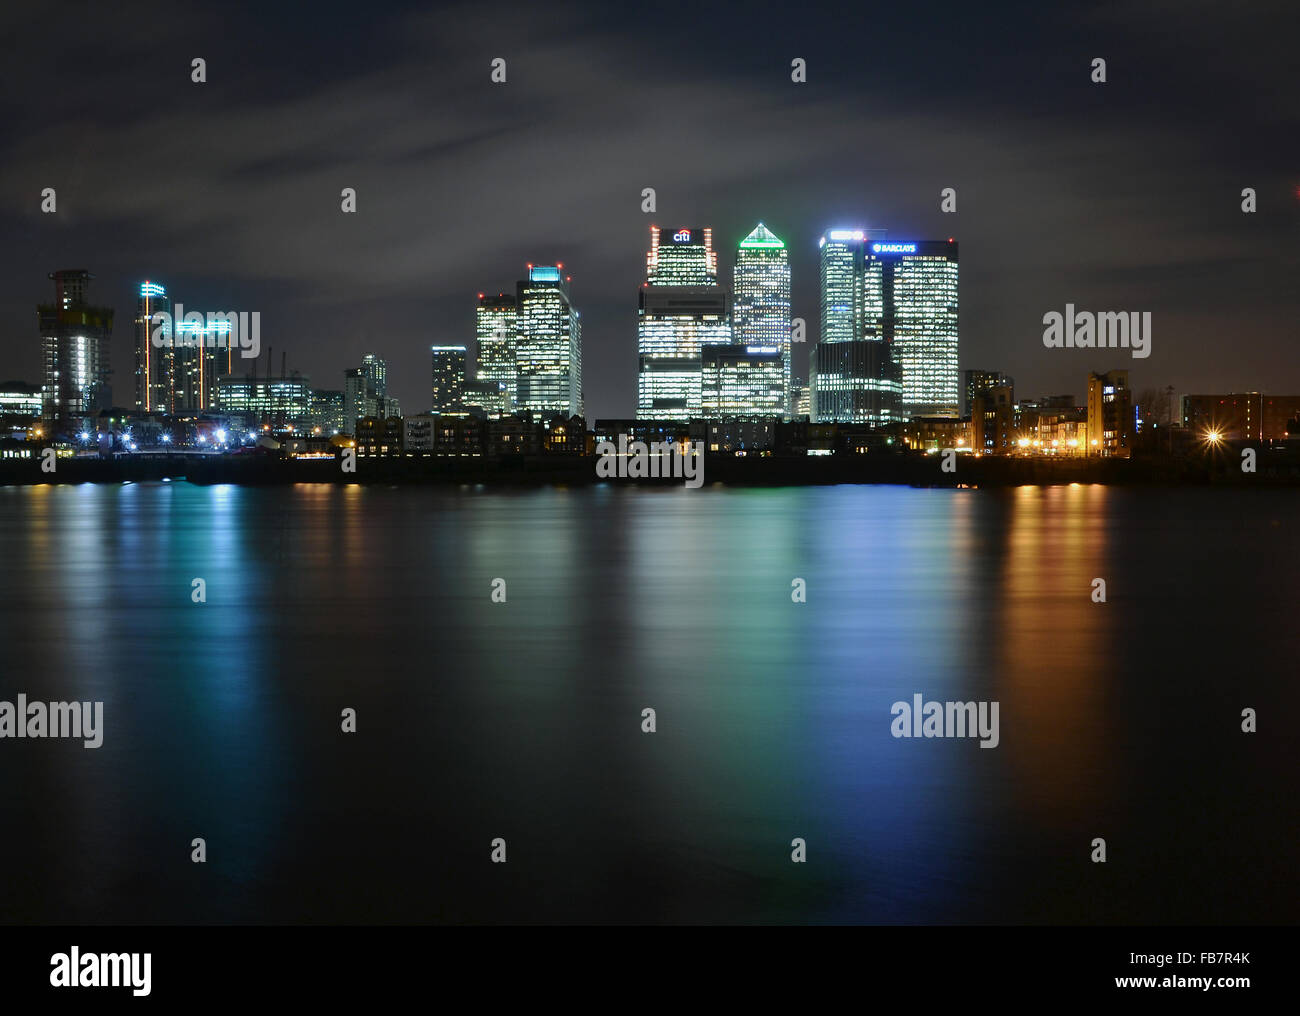 This is a photograph of Canary Wharf financial centre in London. Stock Photo